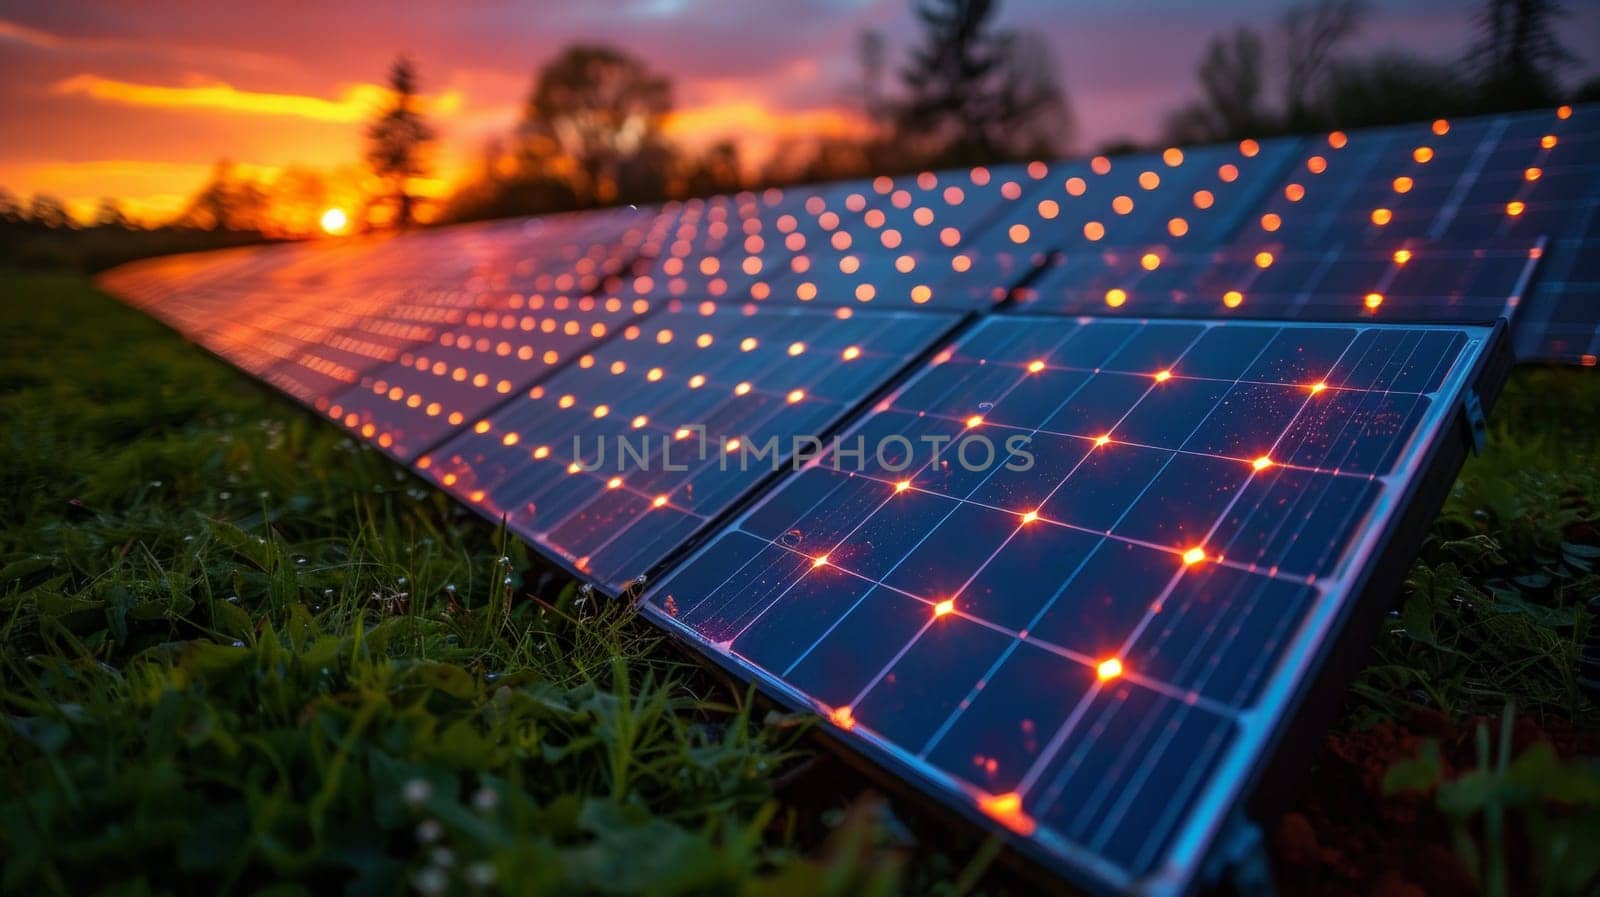 A row of solar panels with lights on them in the field